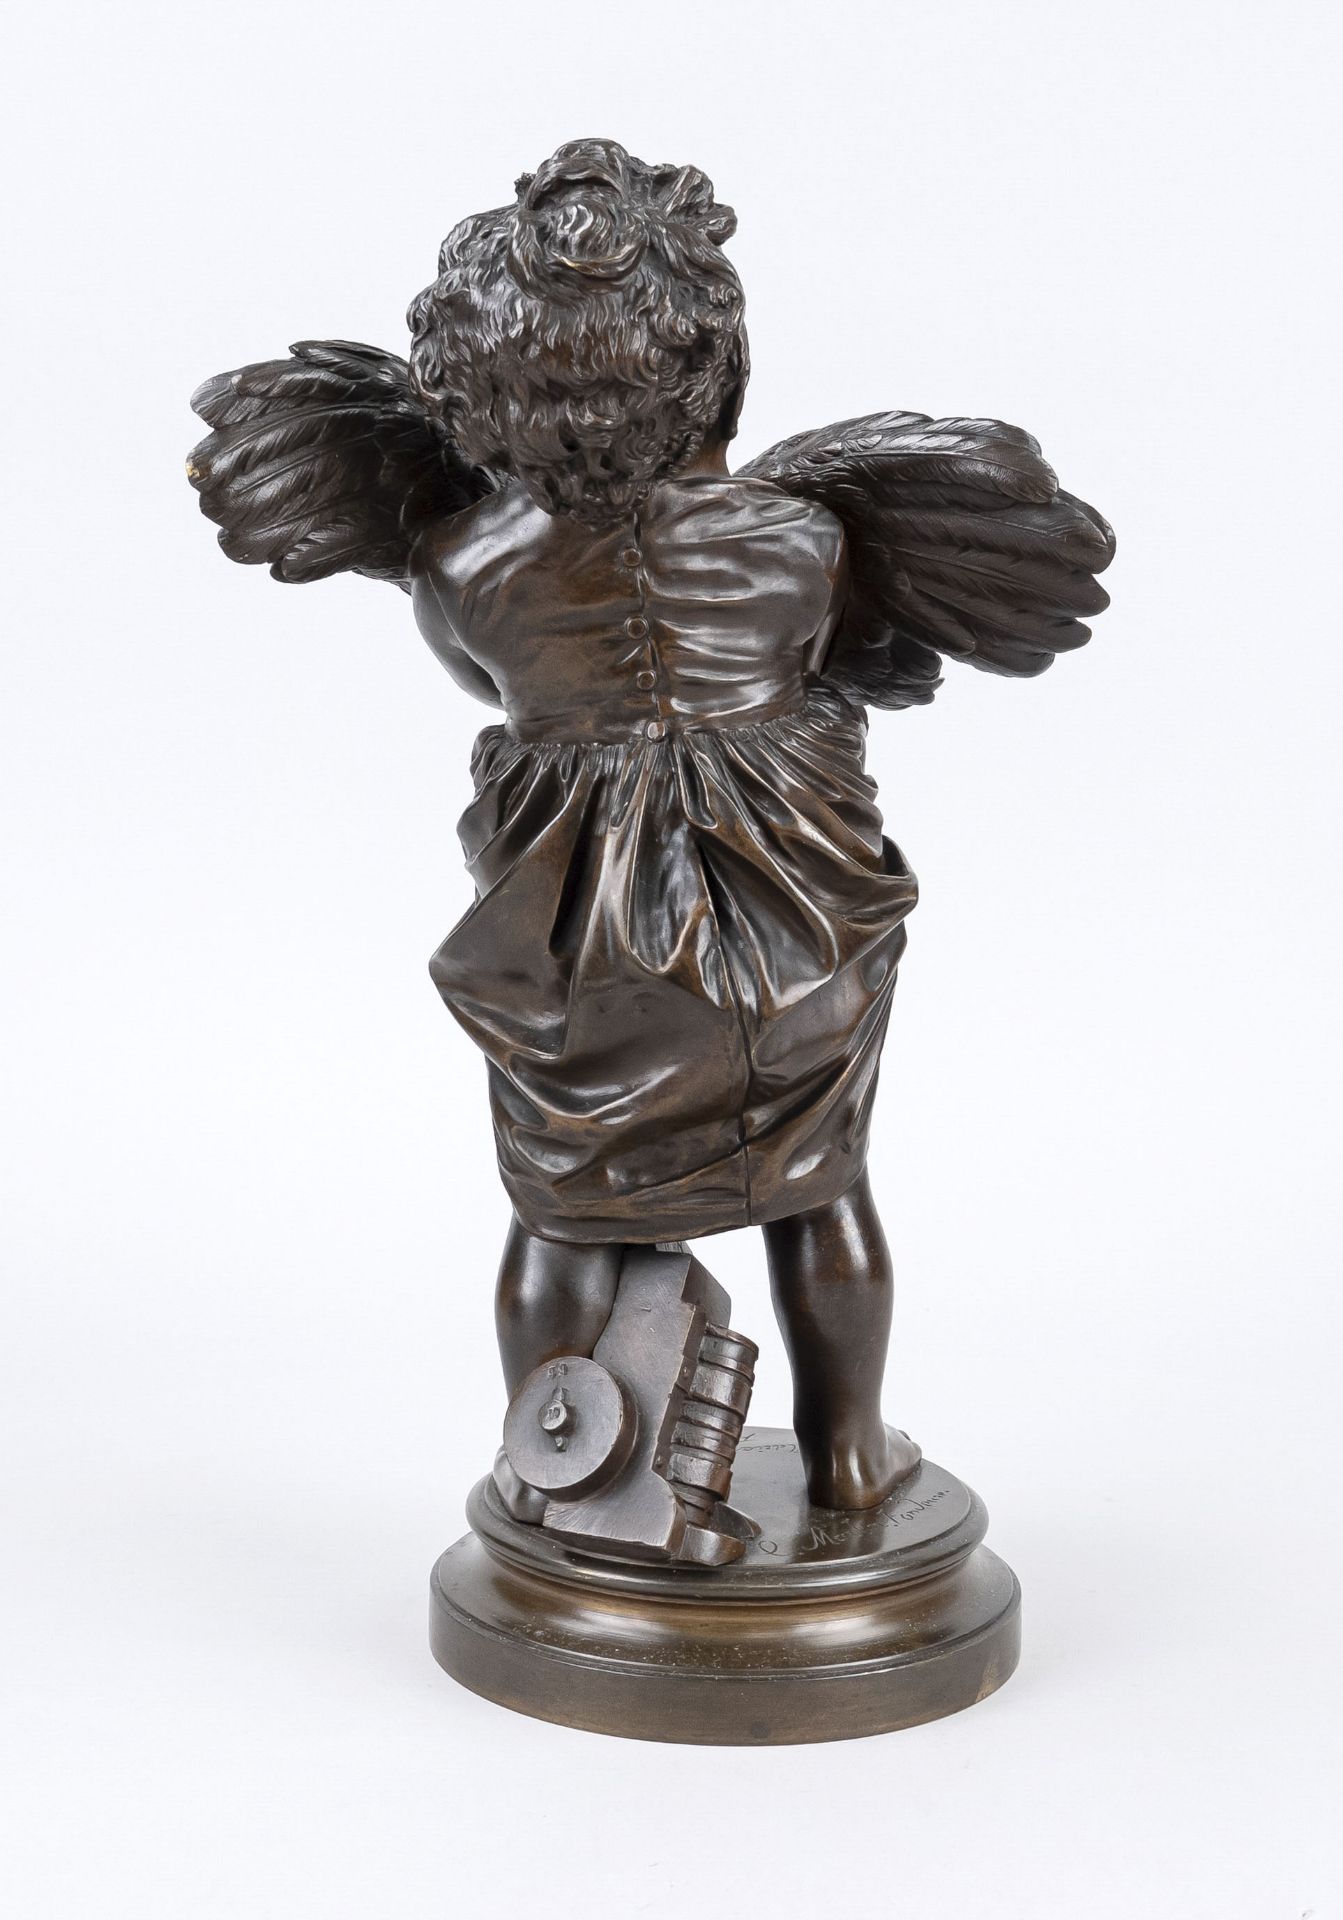 Adriano Cecioni (1836/38-1886), Italian sculptor, crying boy holding a rooster tightly in front of - Image 2 of 2